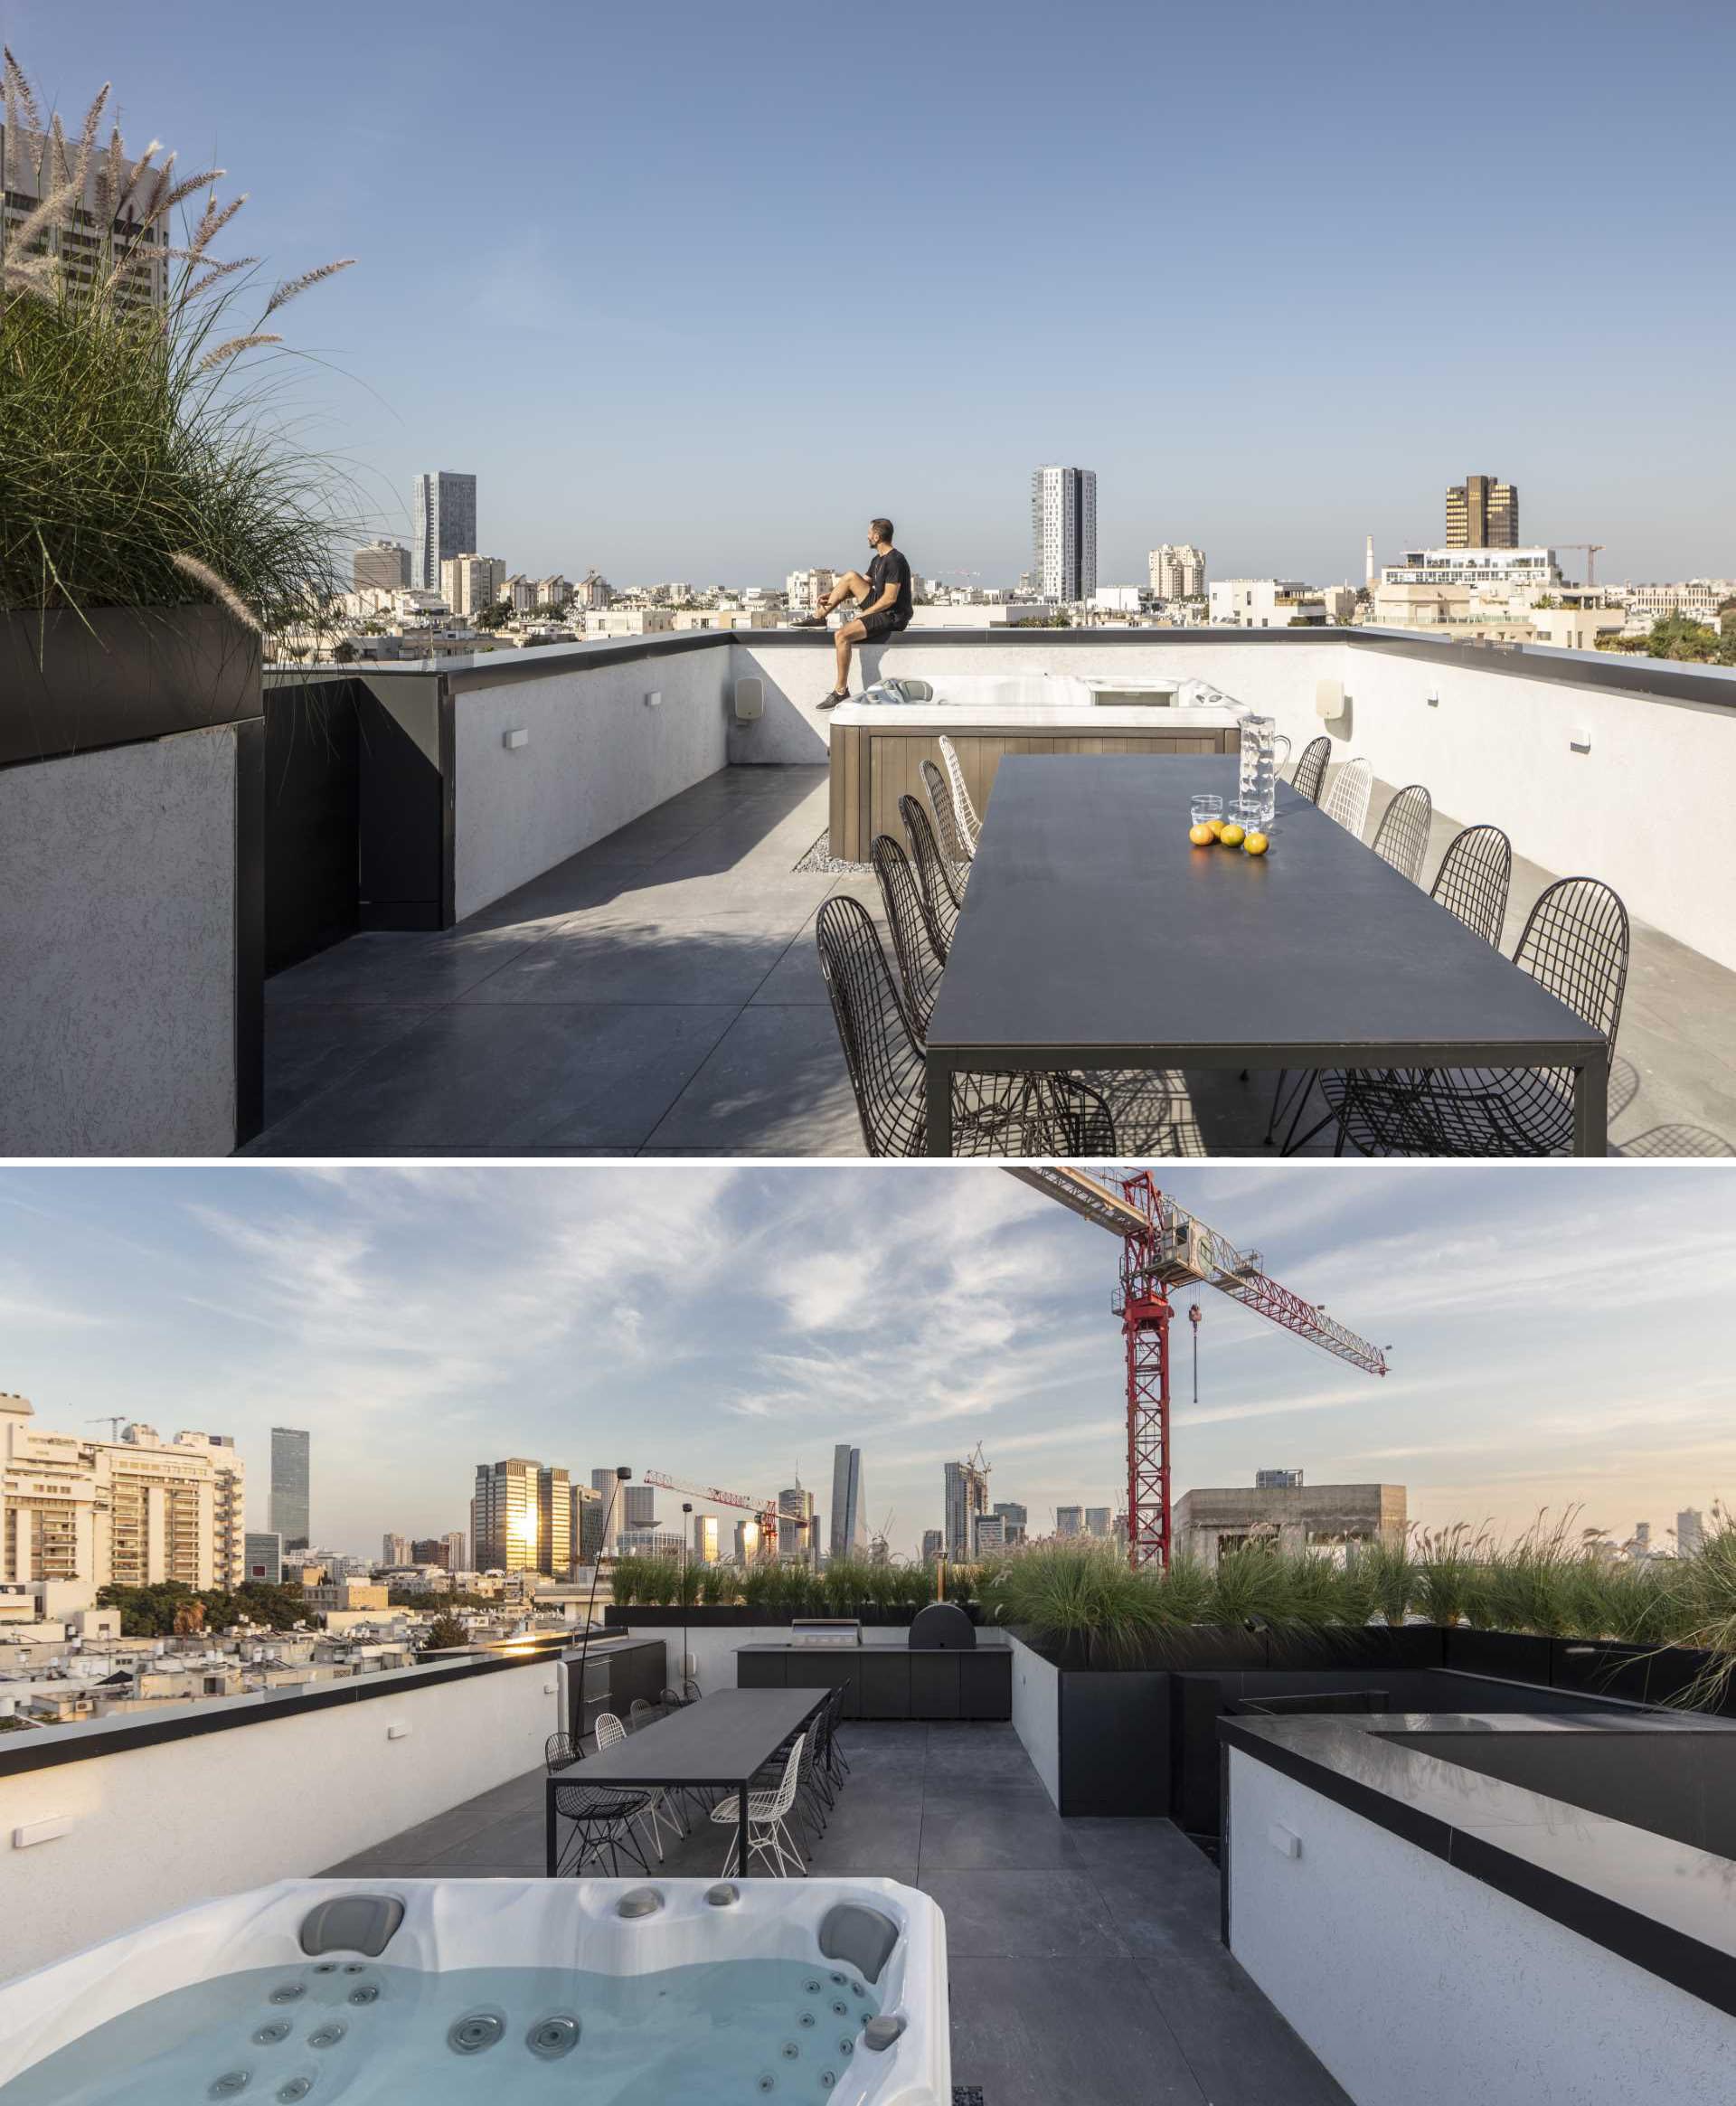 This modern rooftop, which has extensive views of the city, offers a place for outdoor dining and cooking, as well as a place for relaxing in the Jacuzzi.